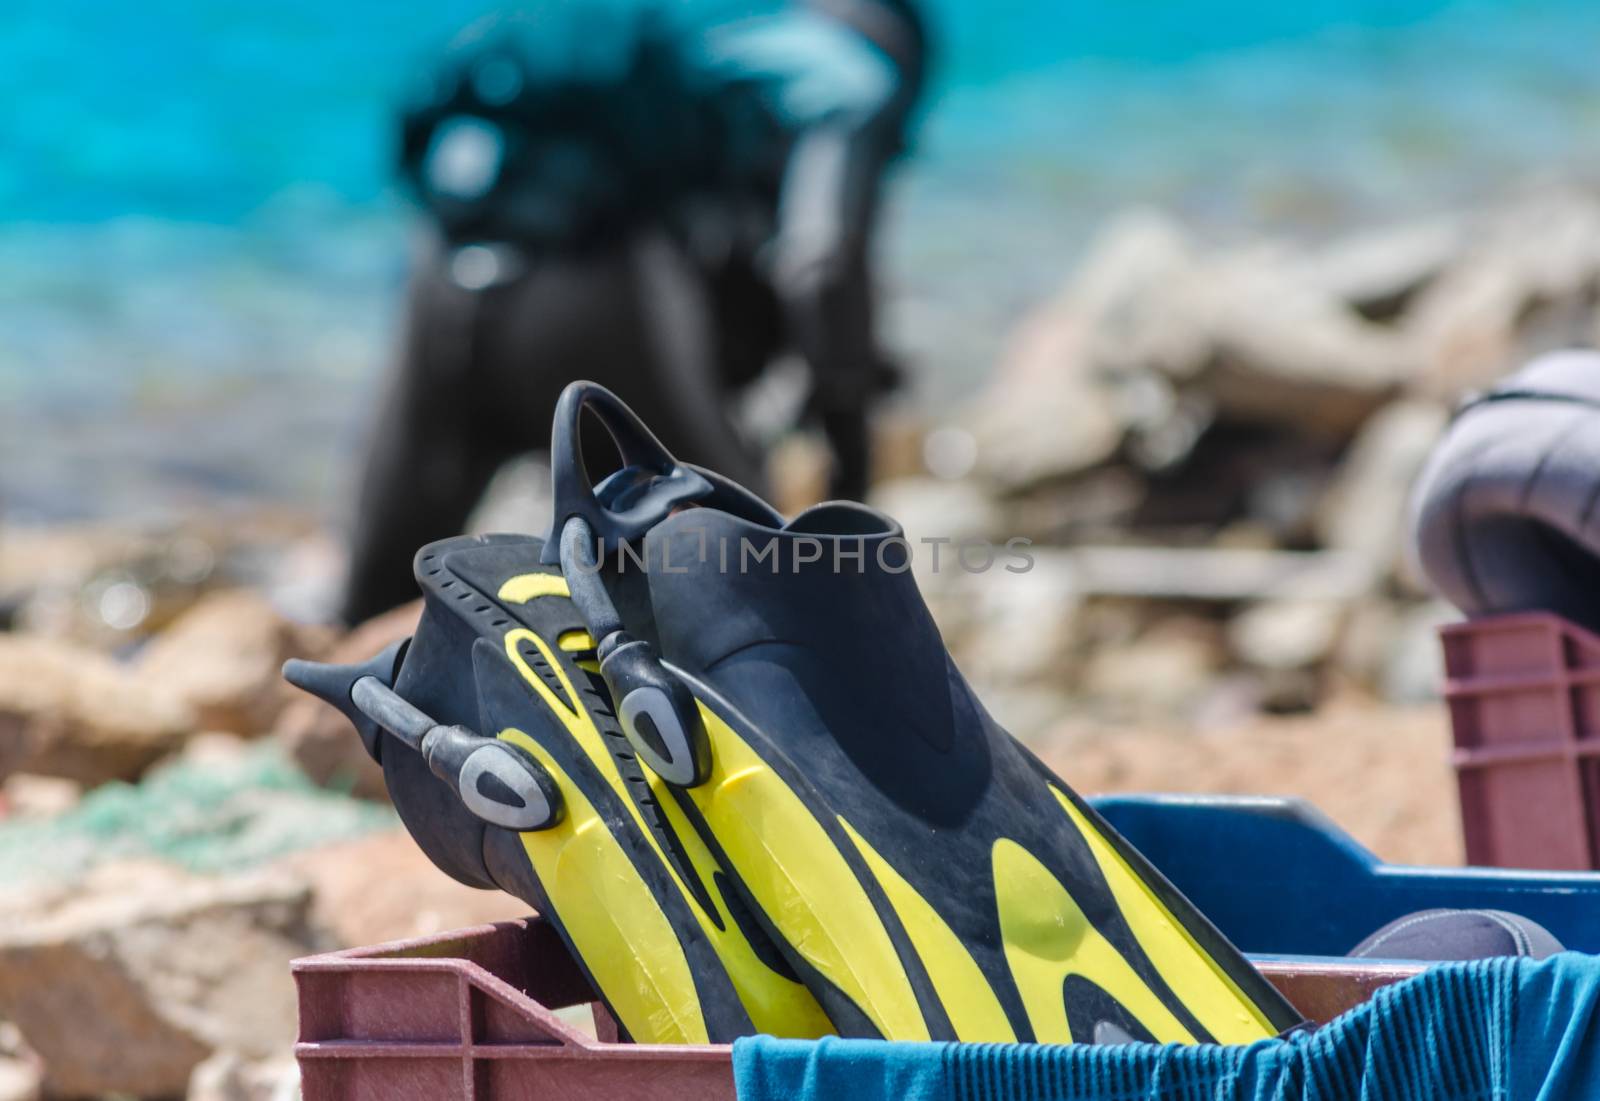 diving equipment in a crate on the beach in Egypt by Gera8th